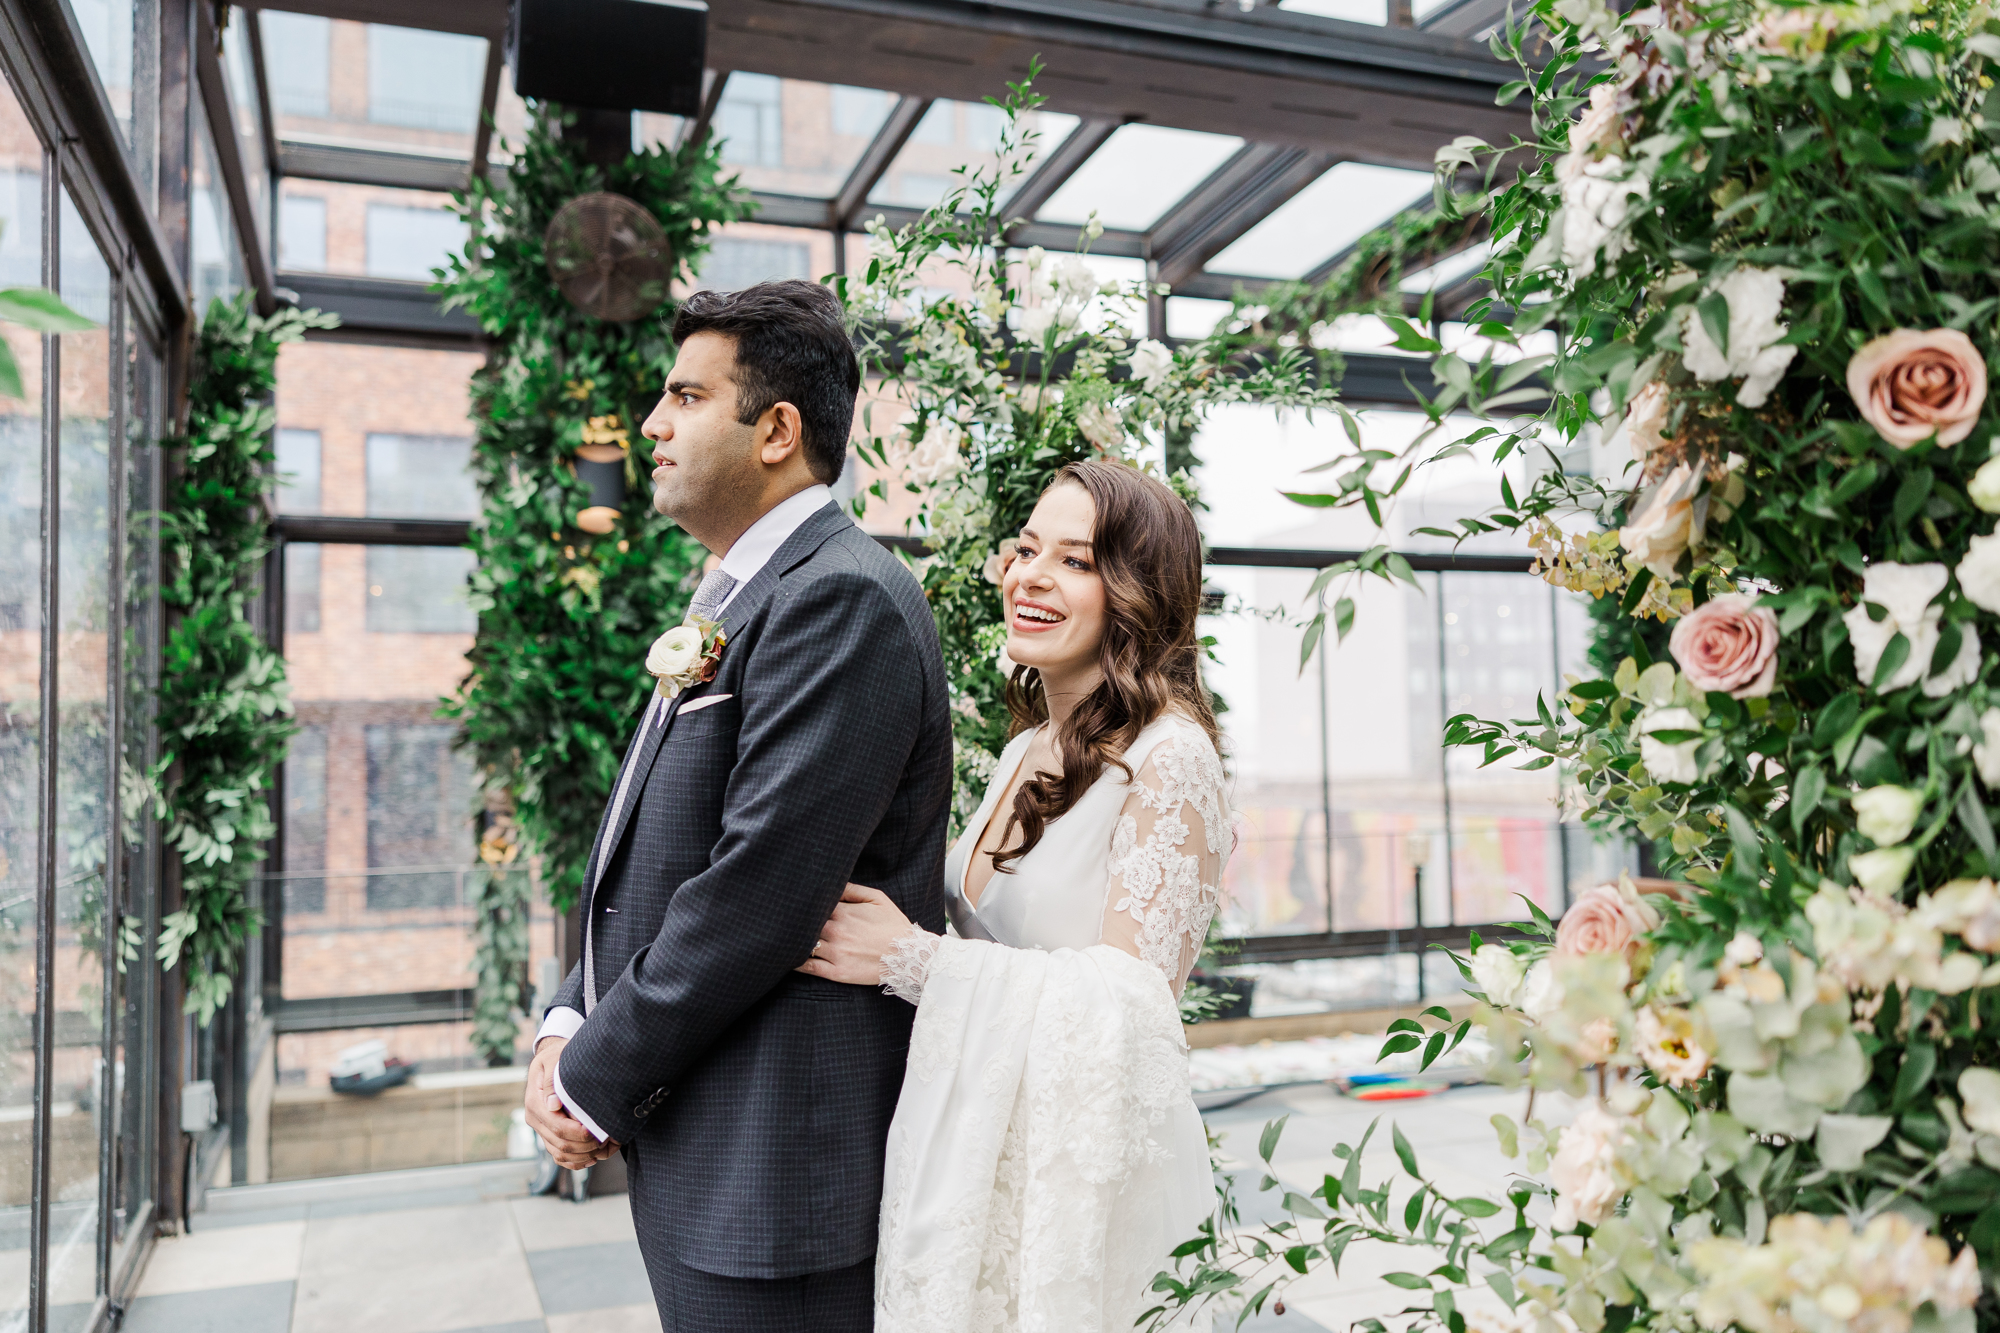 Playful Brooklyn Wedding Photography at 74Wythe with Rooftop NYC Views